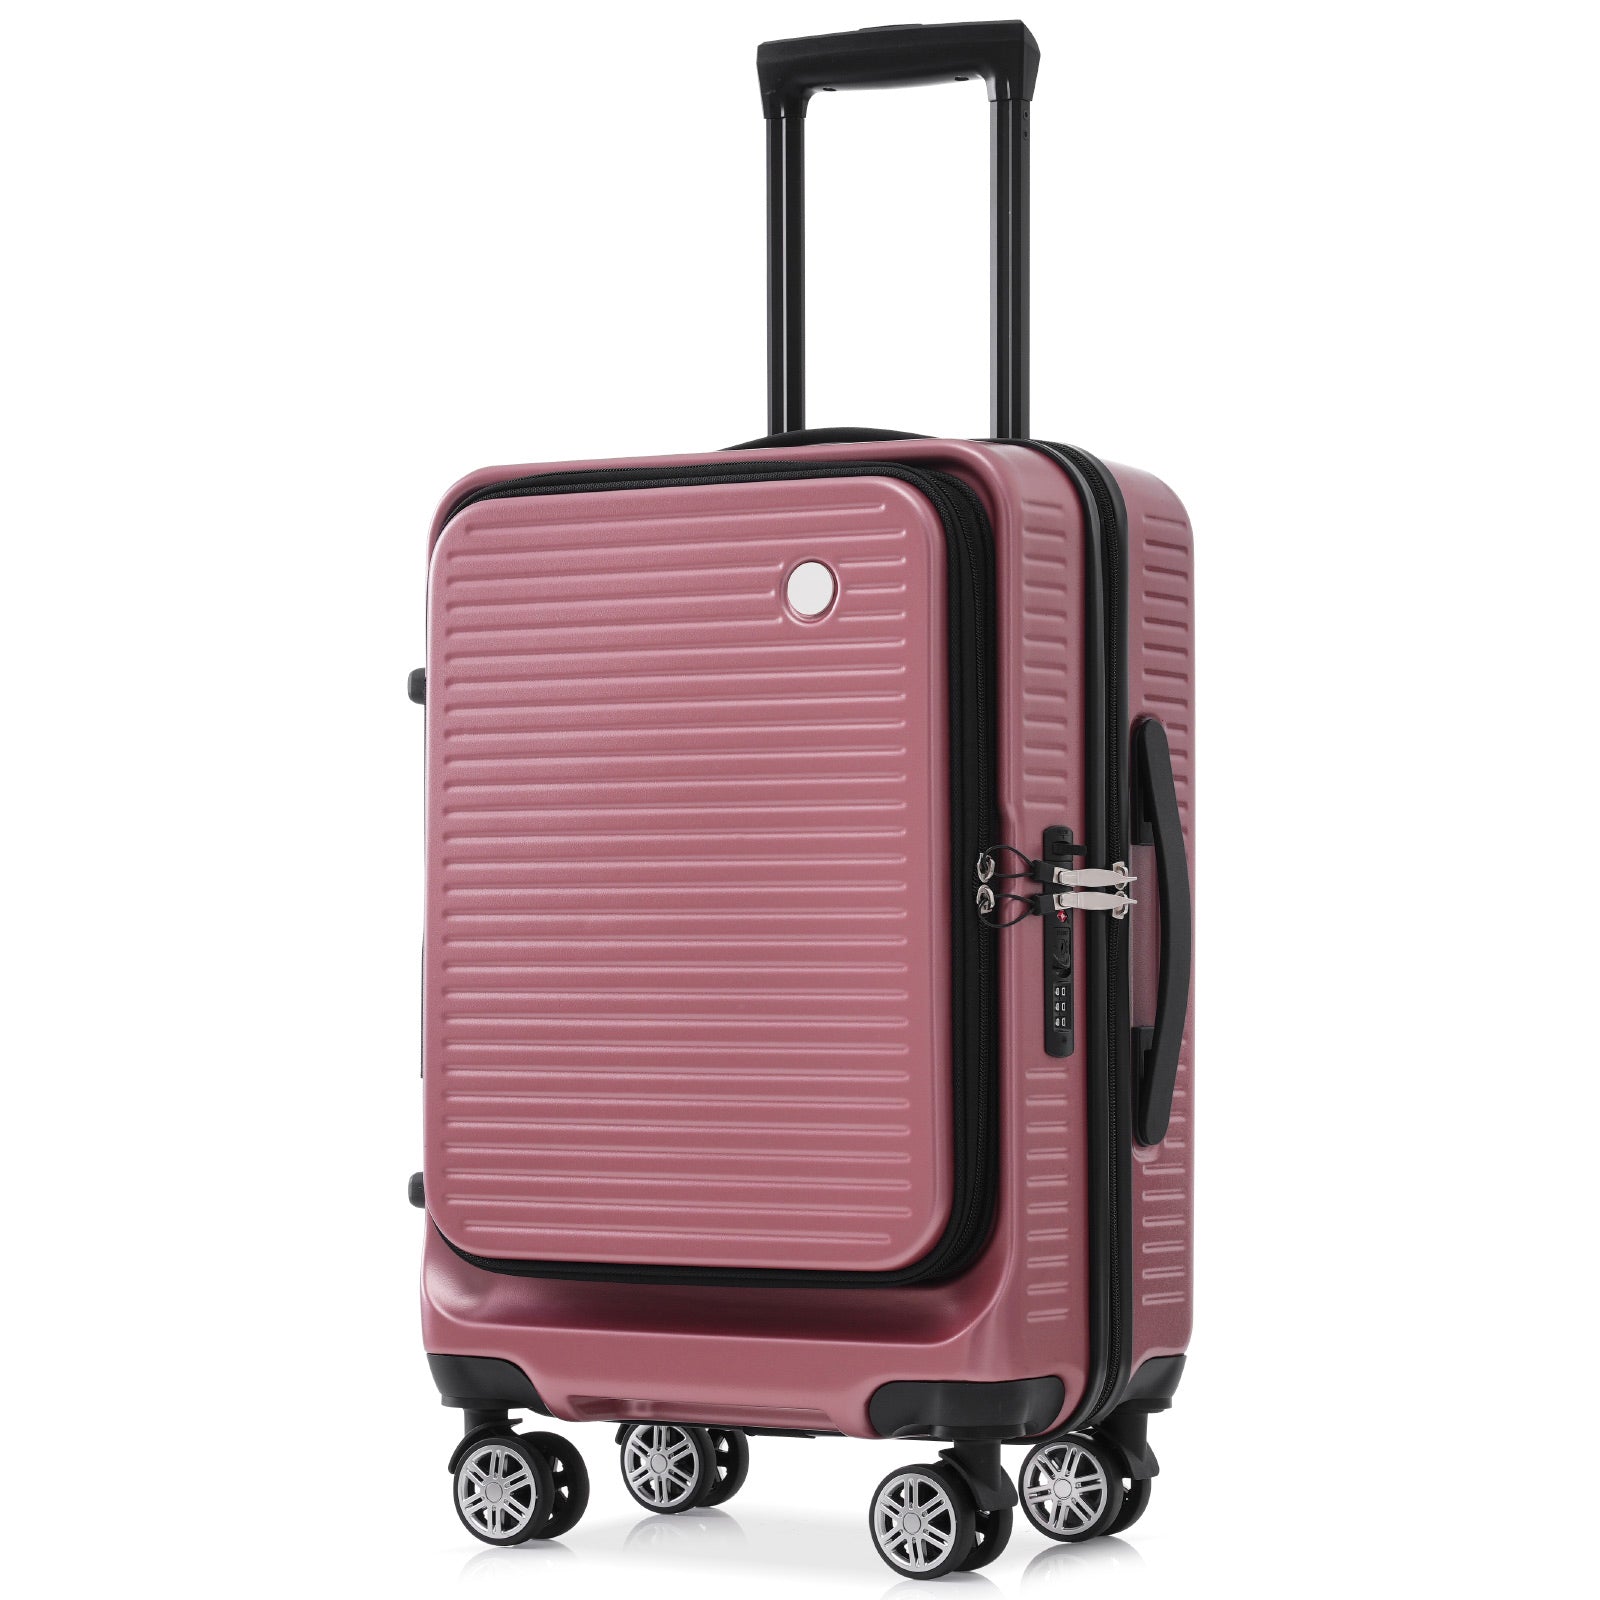 Carry on Luggage 20 Inch Front Open Luggage rose gold-abs